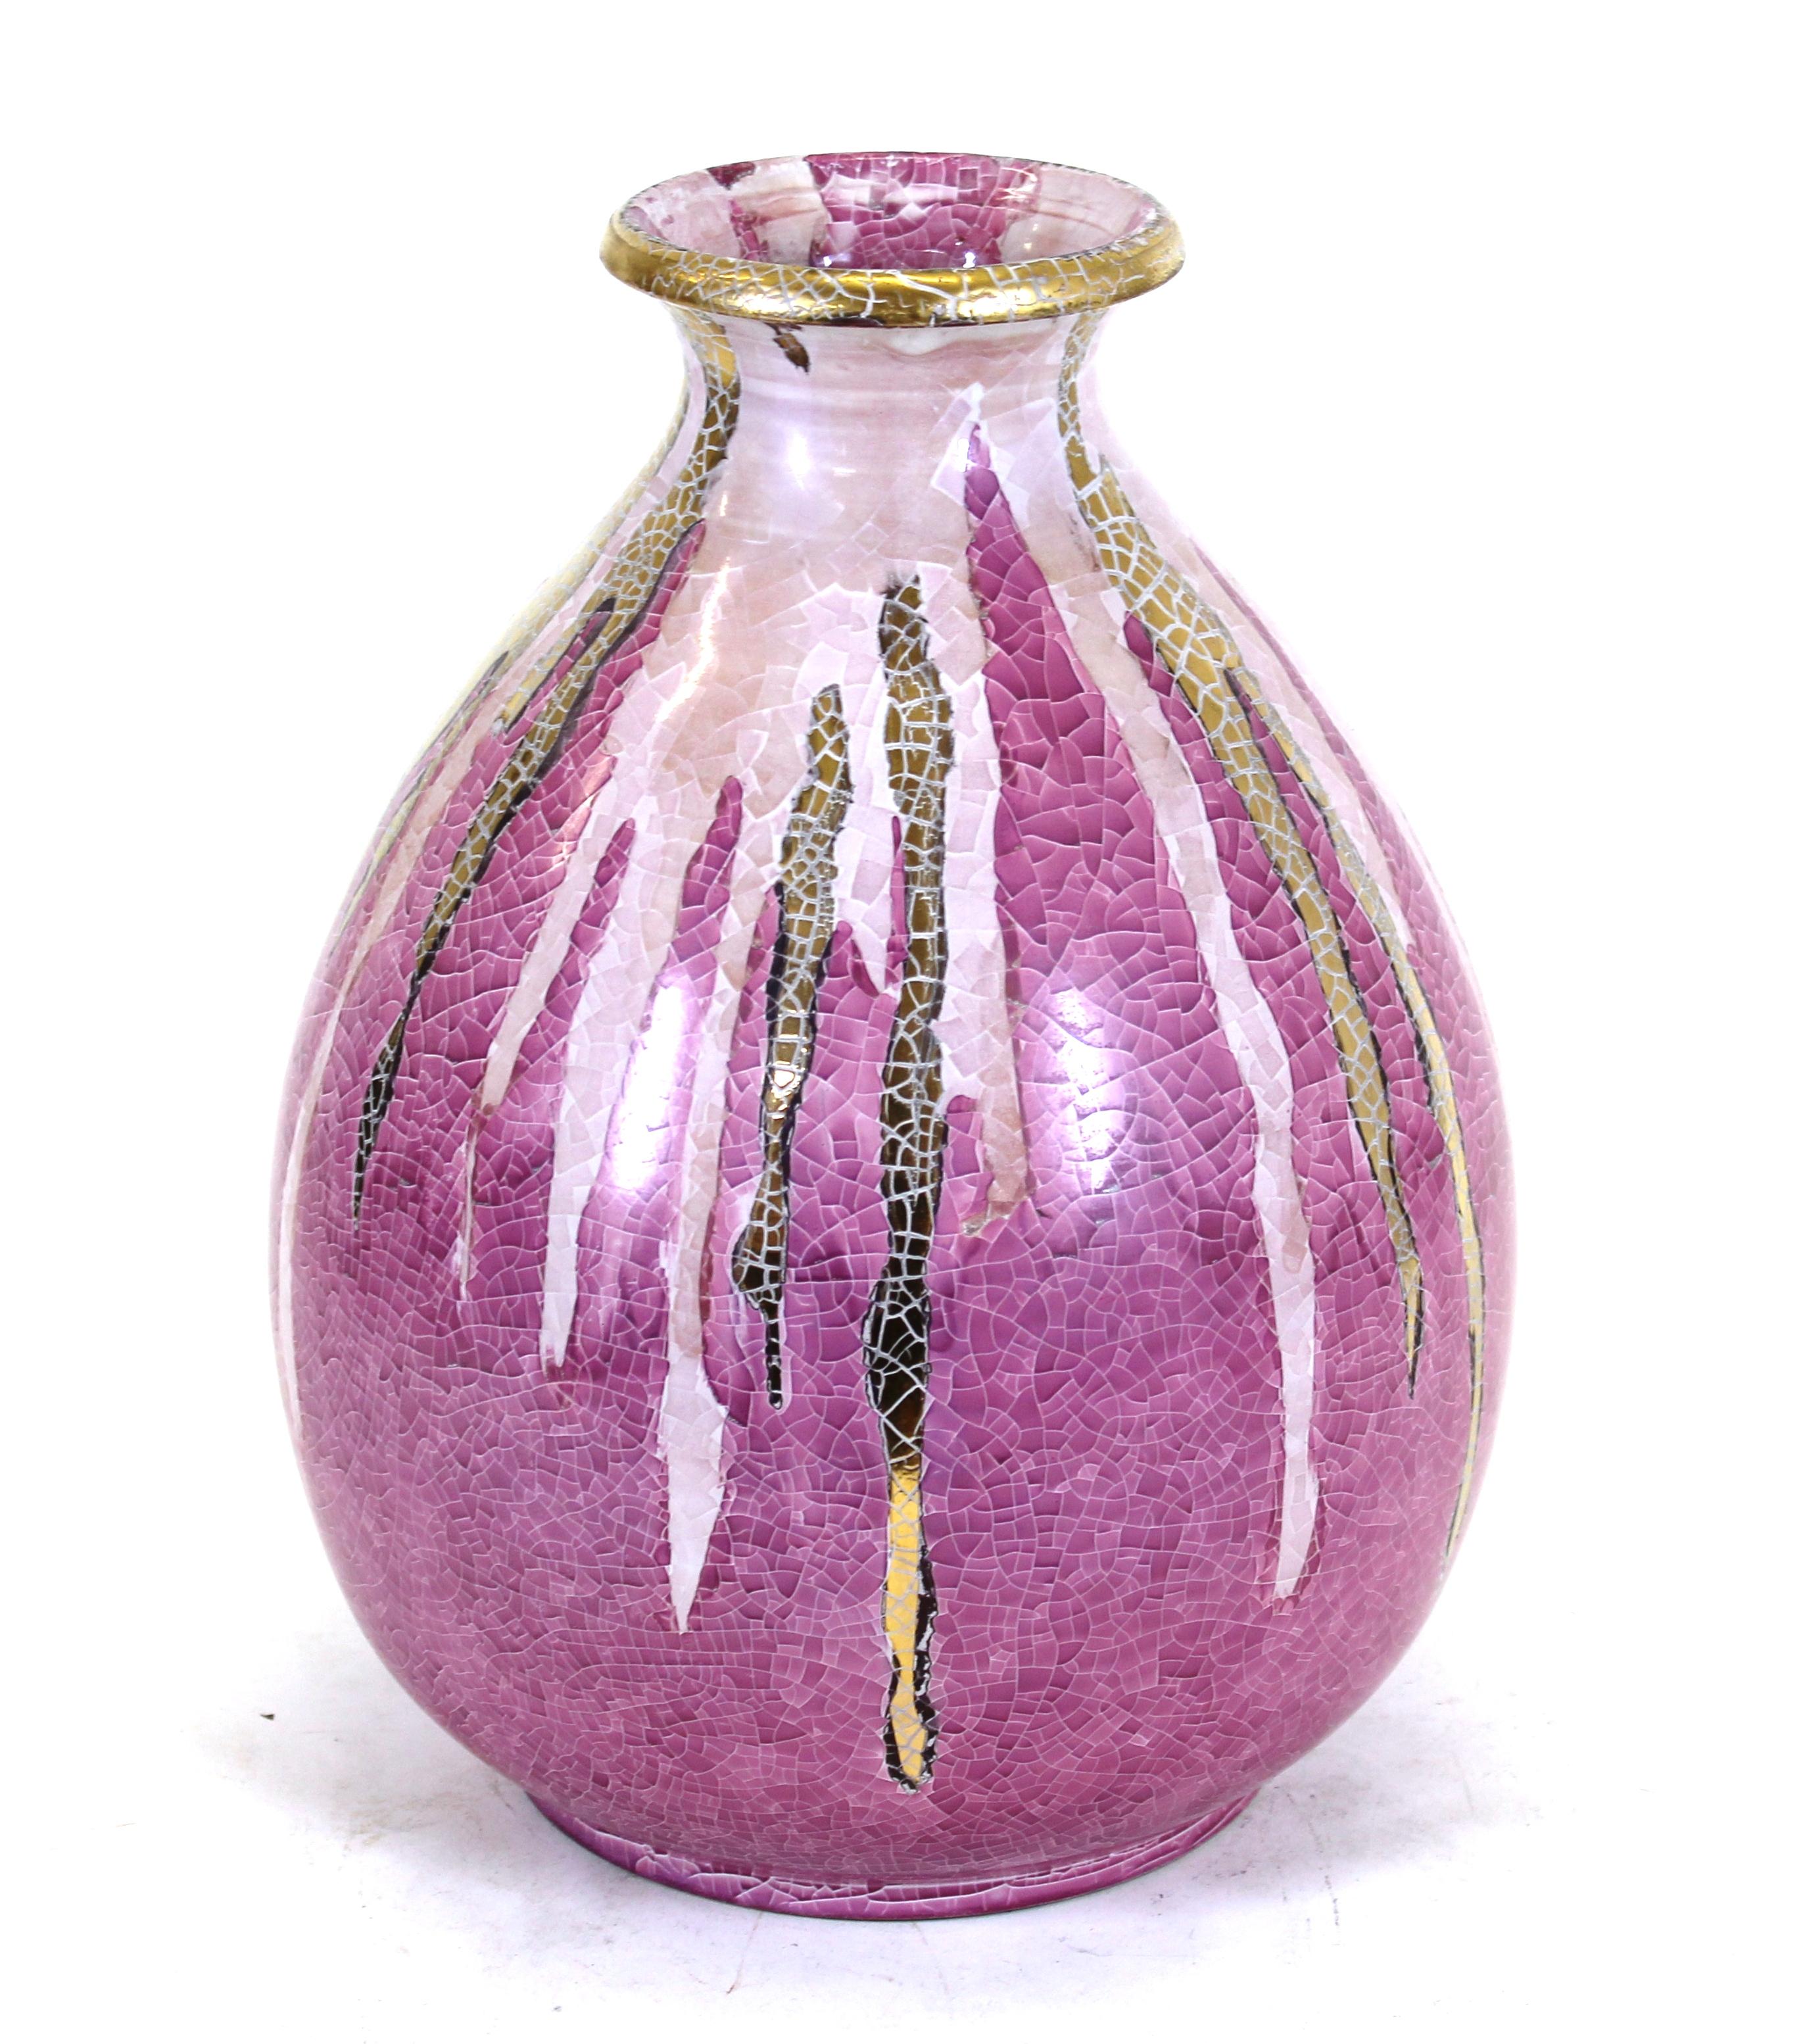 Italian Mid-Century Modern ceramic vase with pink craquelure glaze with 24k gold decoration. Made in Italy during the 1950's-1960's, with a 'Made in Italy' paper label on bottom.